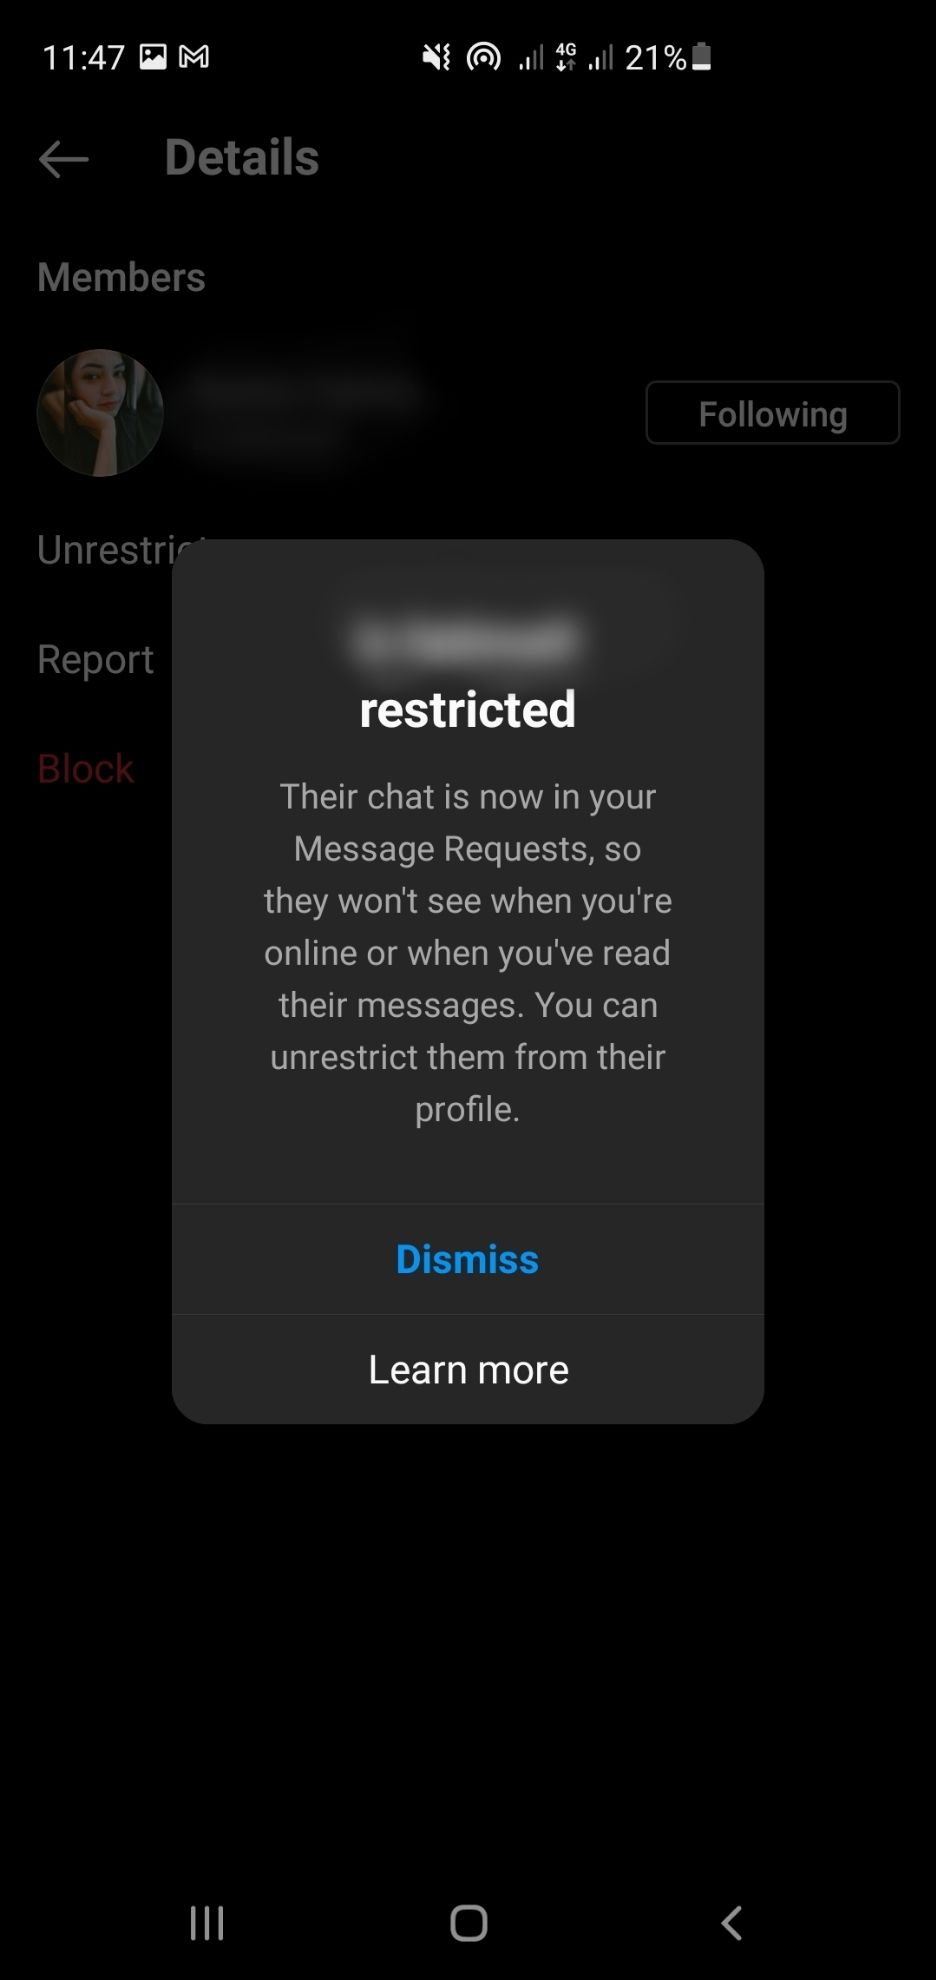 Account restricted on Instagram